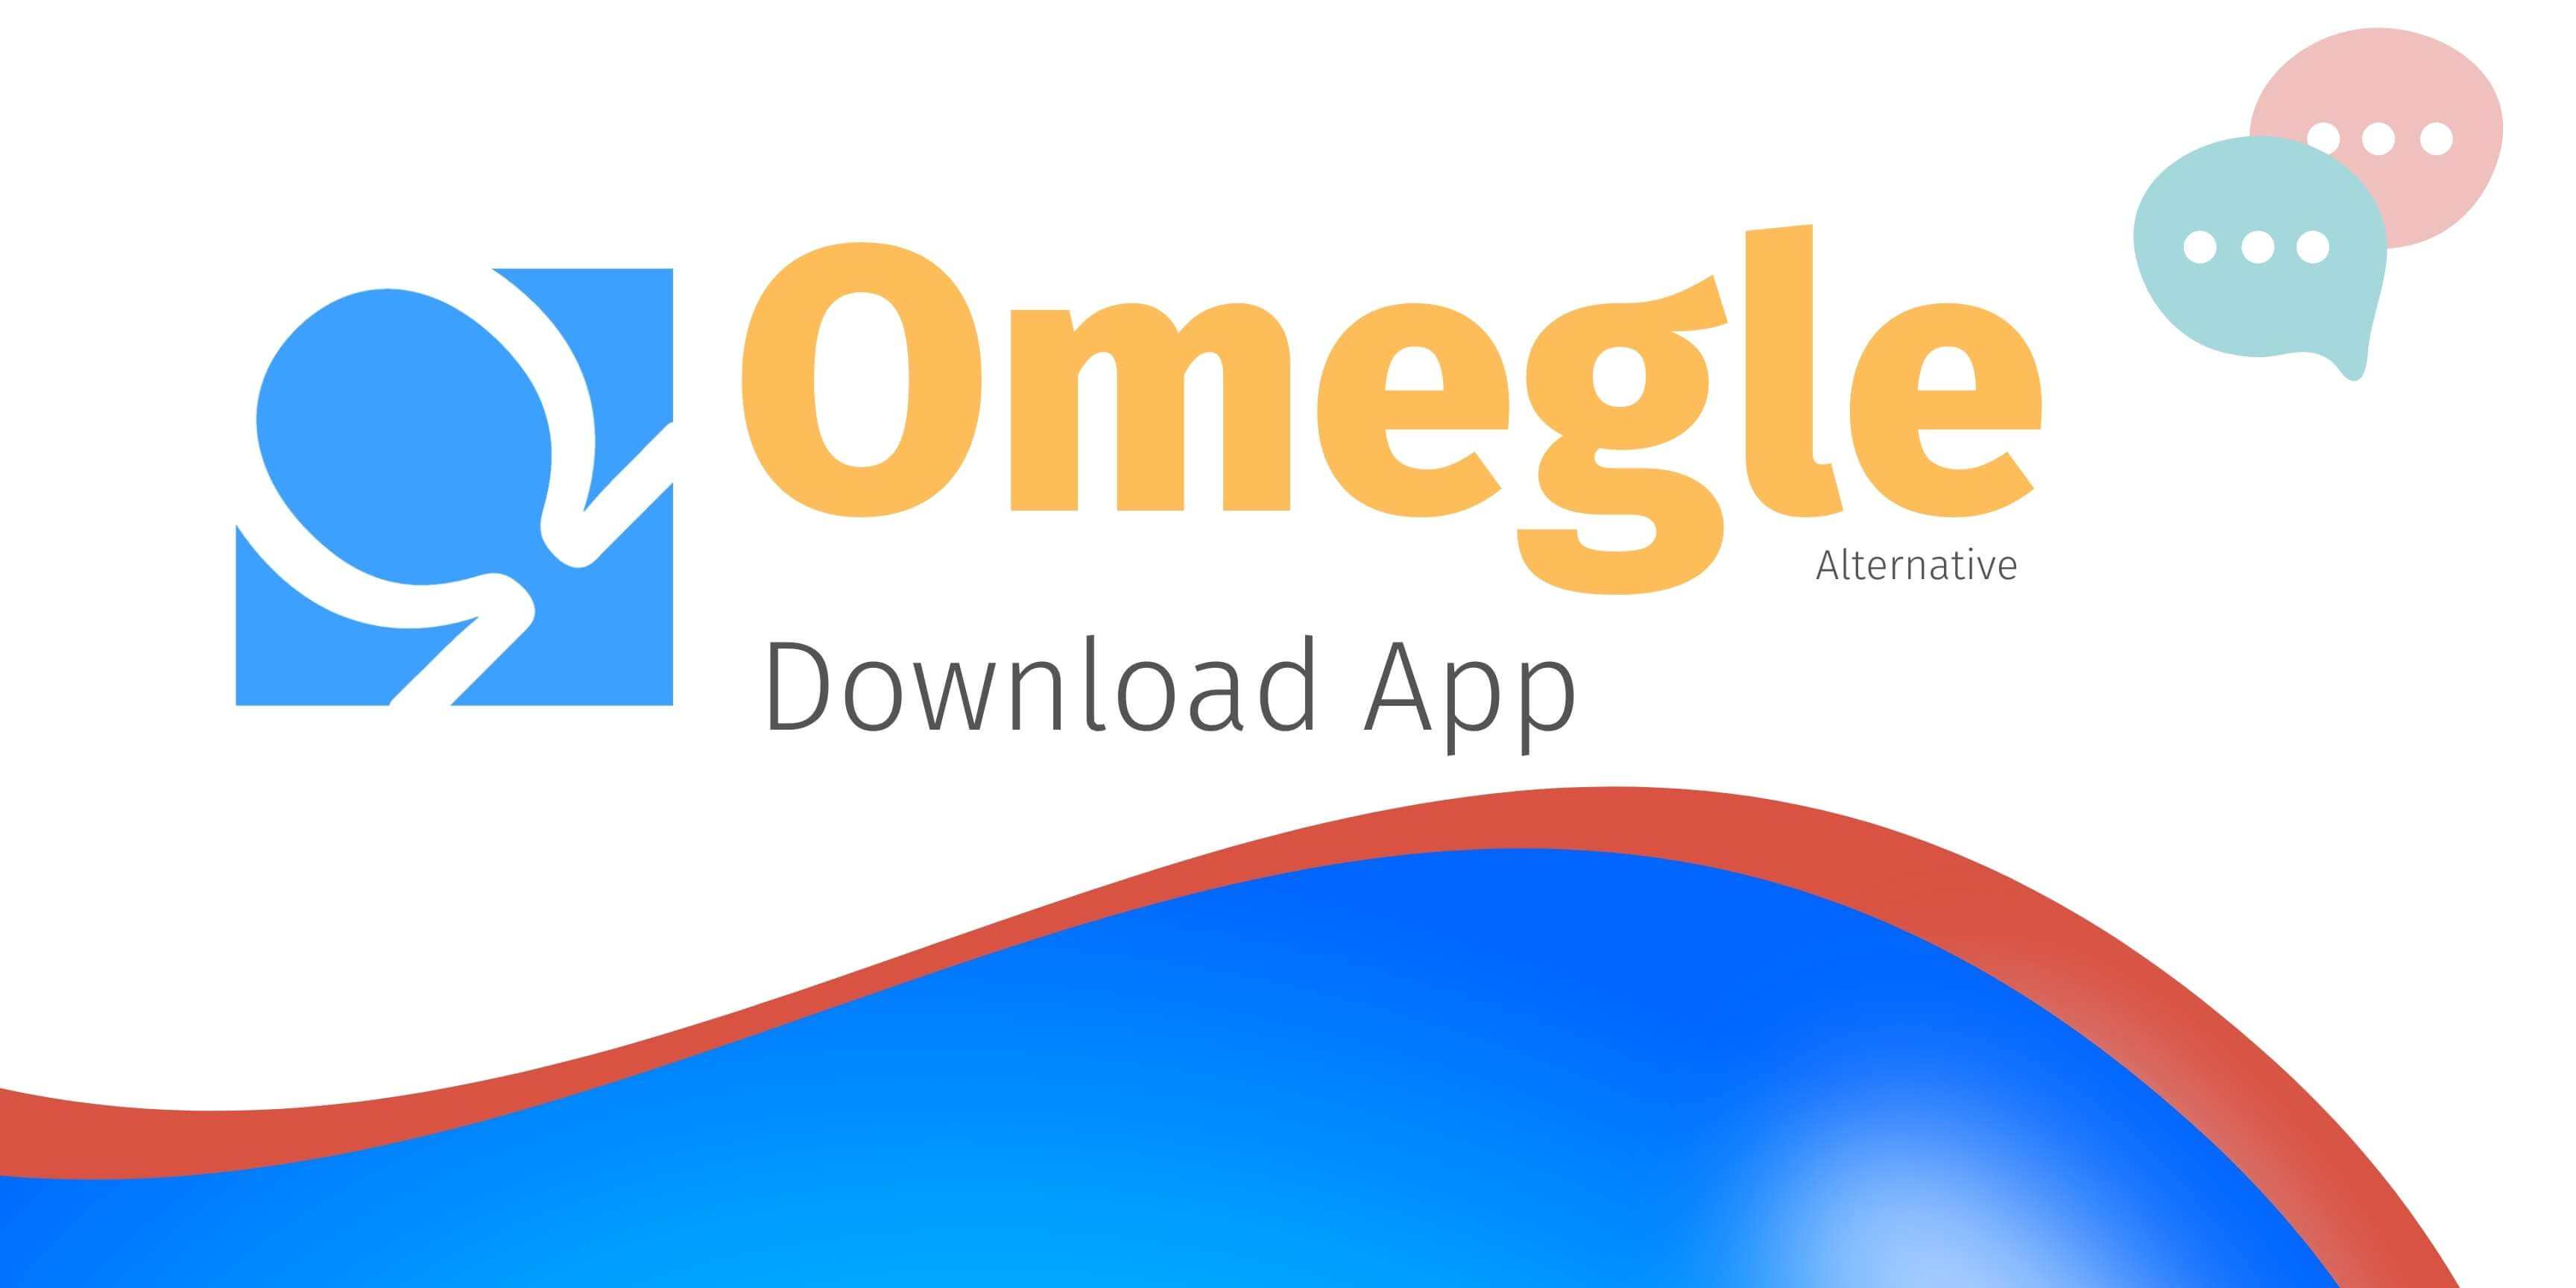 Omegle Alternatives to Chat with Strangers Safely | VeePN Blog